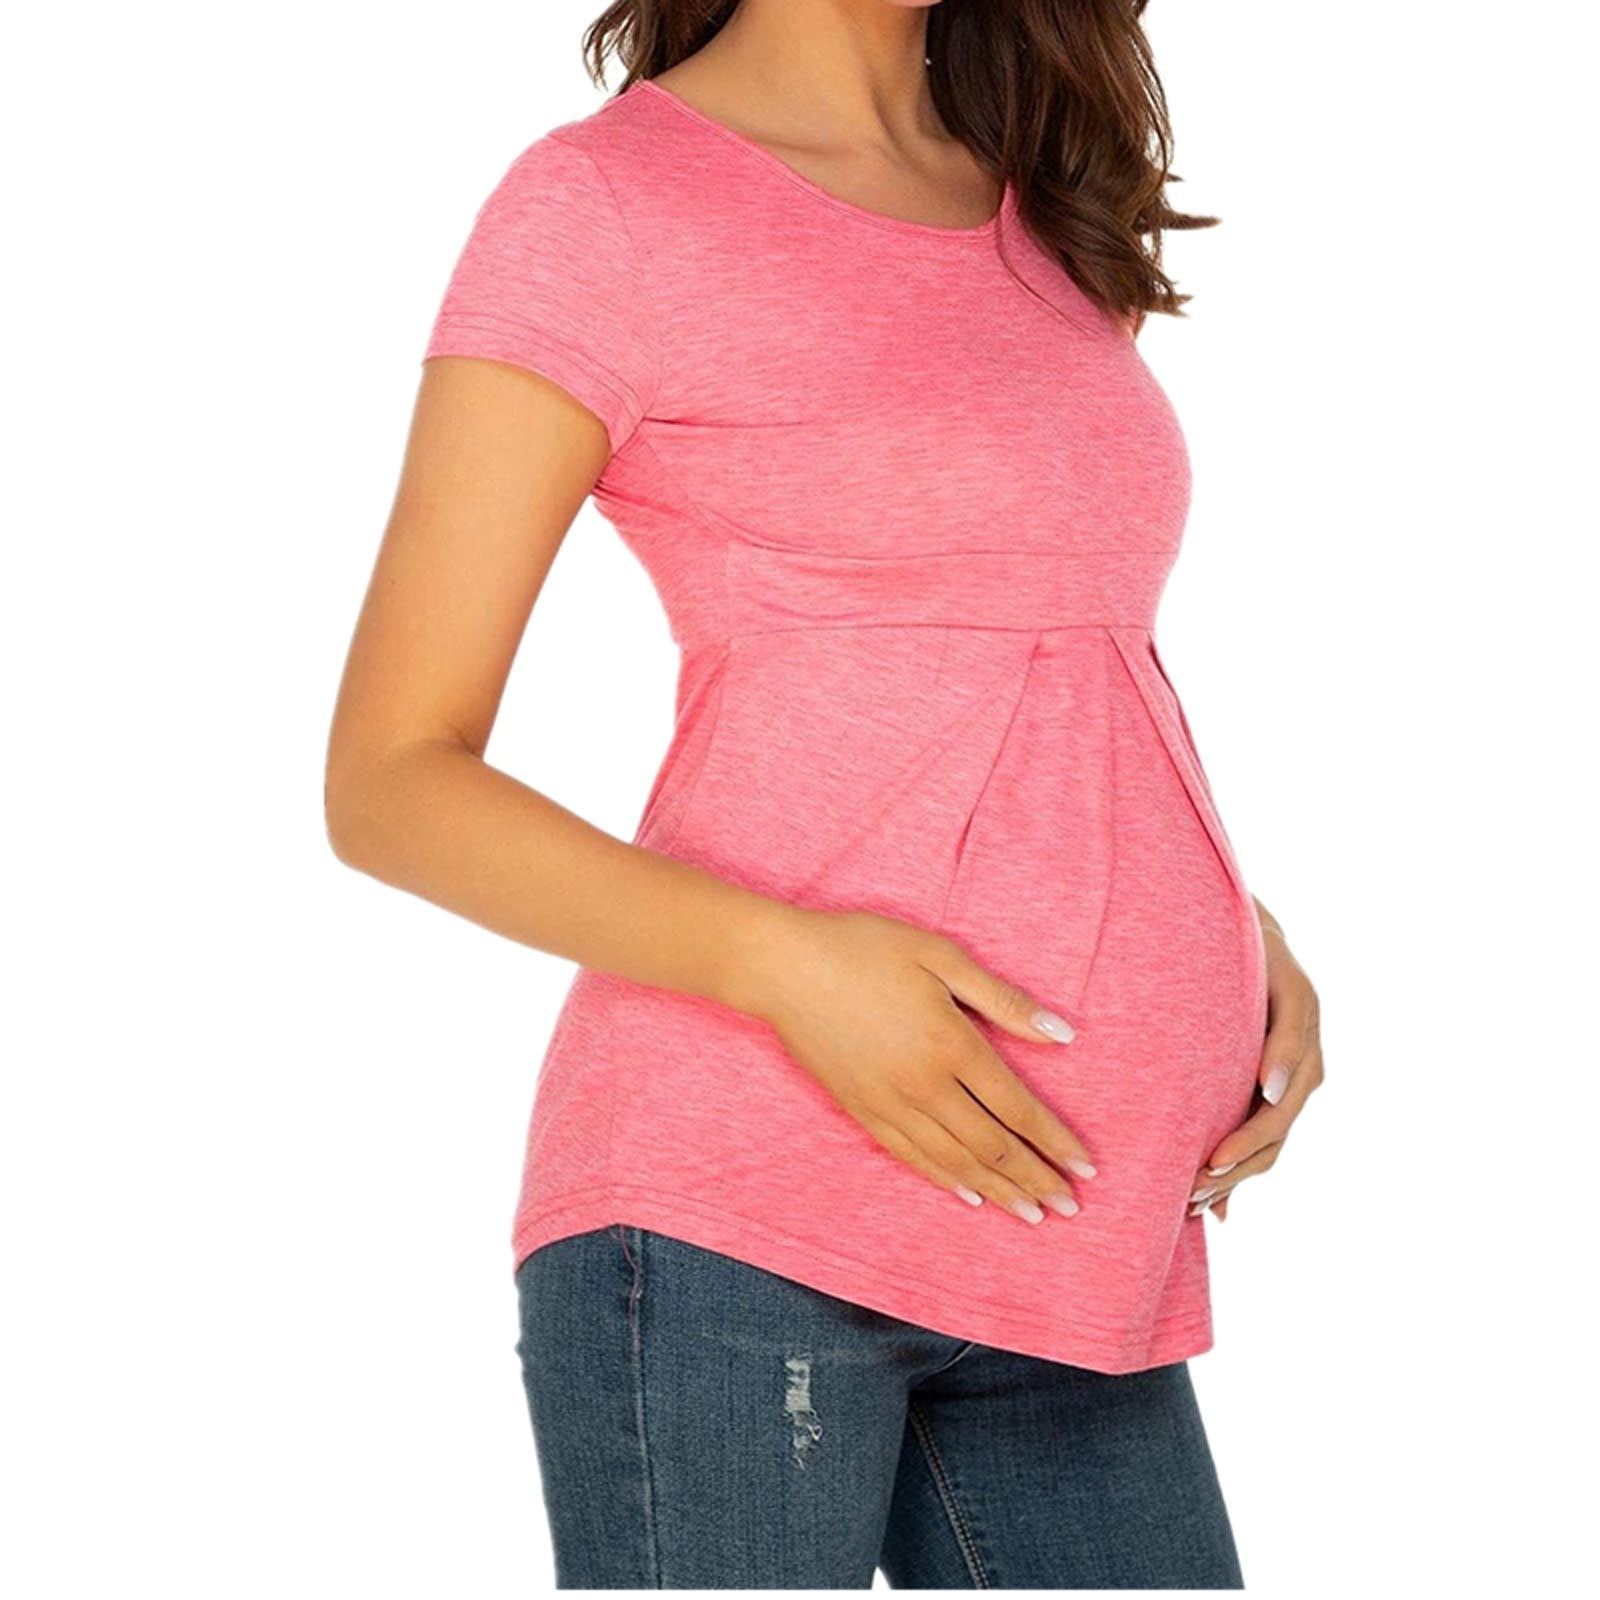 Womens Maternity Shirt Soft Short Sleeve Round Neck Ruffle Fold Pregnant Tops Blouses Clothes 